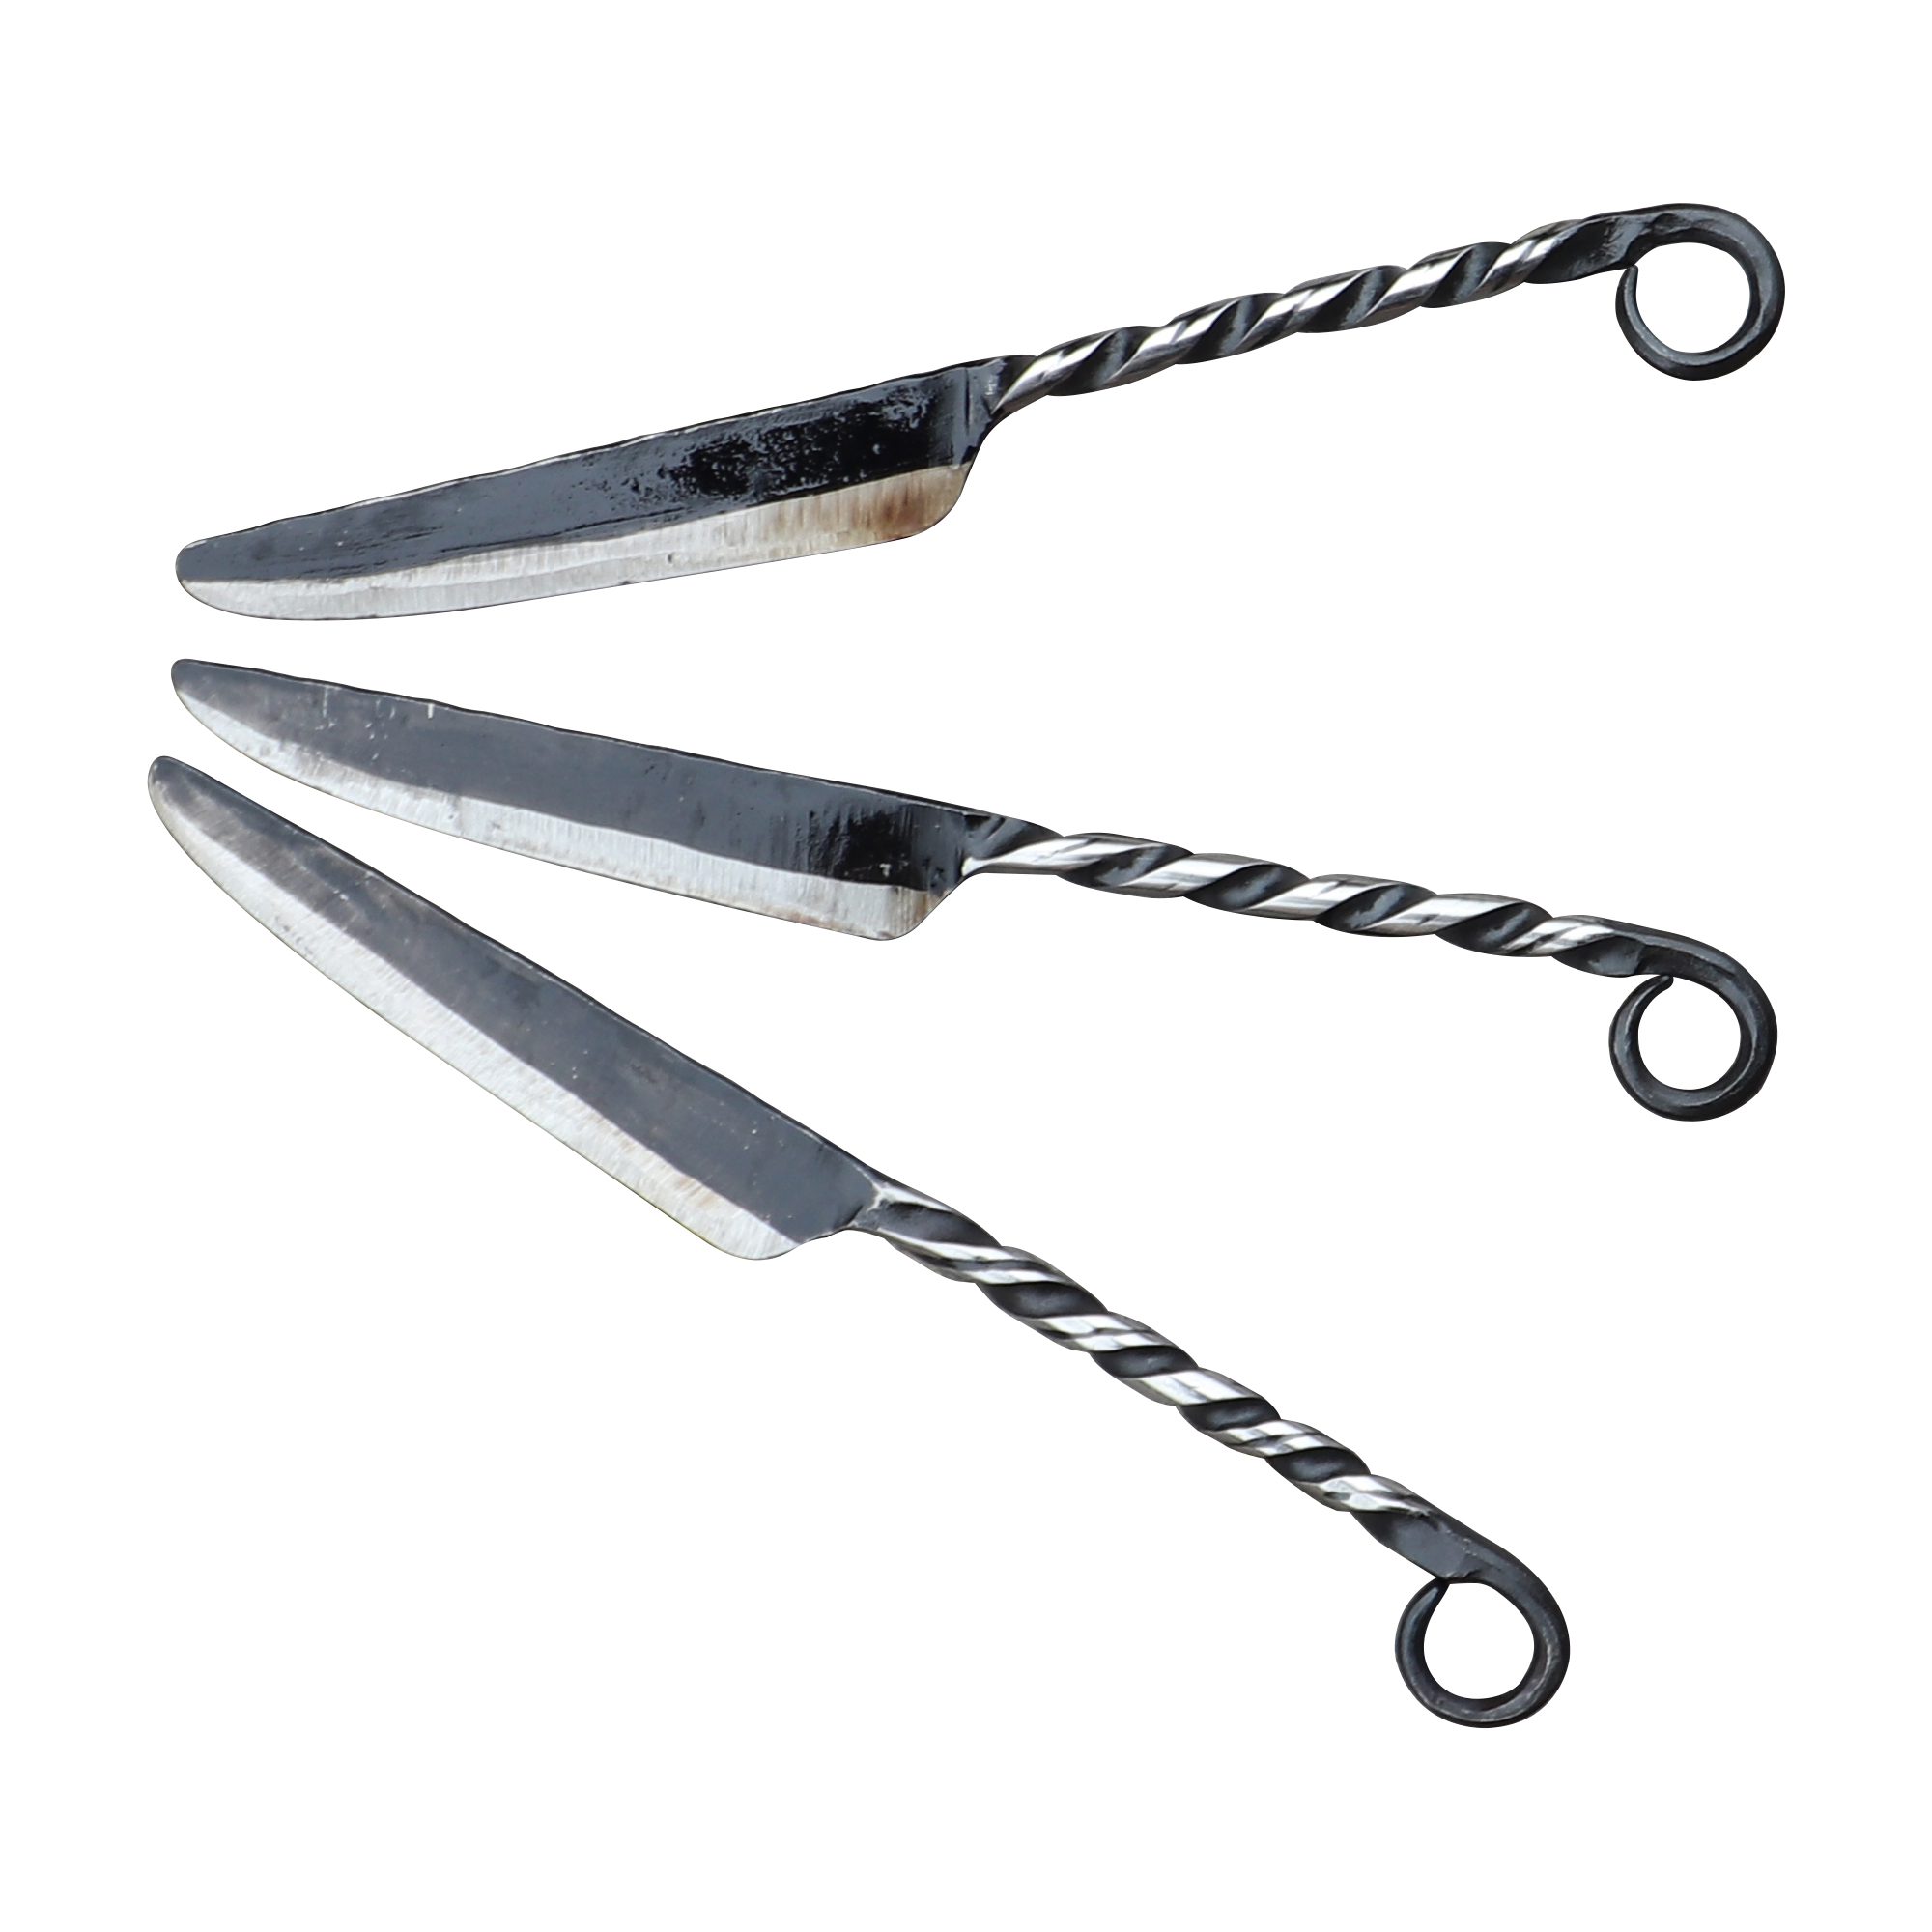 3 Twisted Forged Knives Set